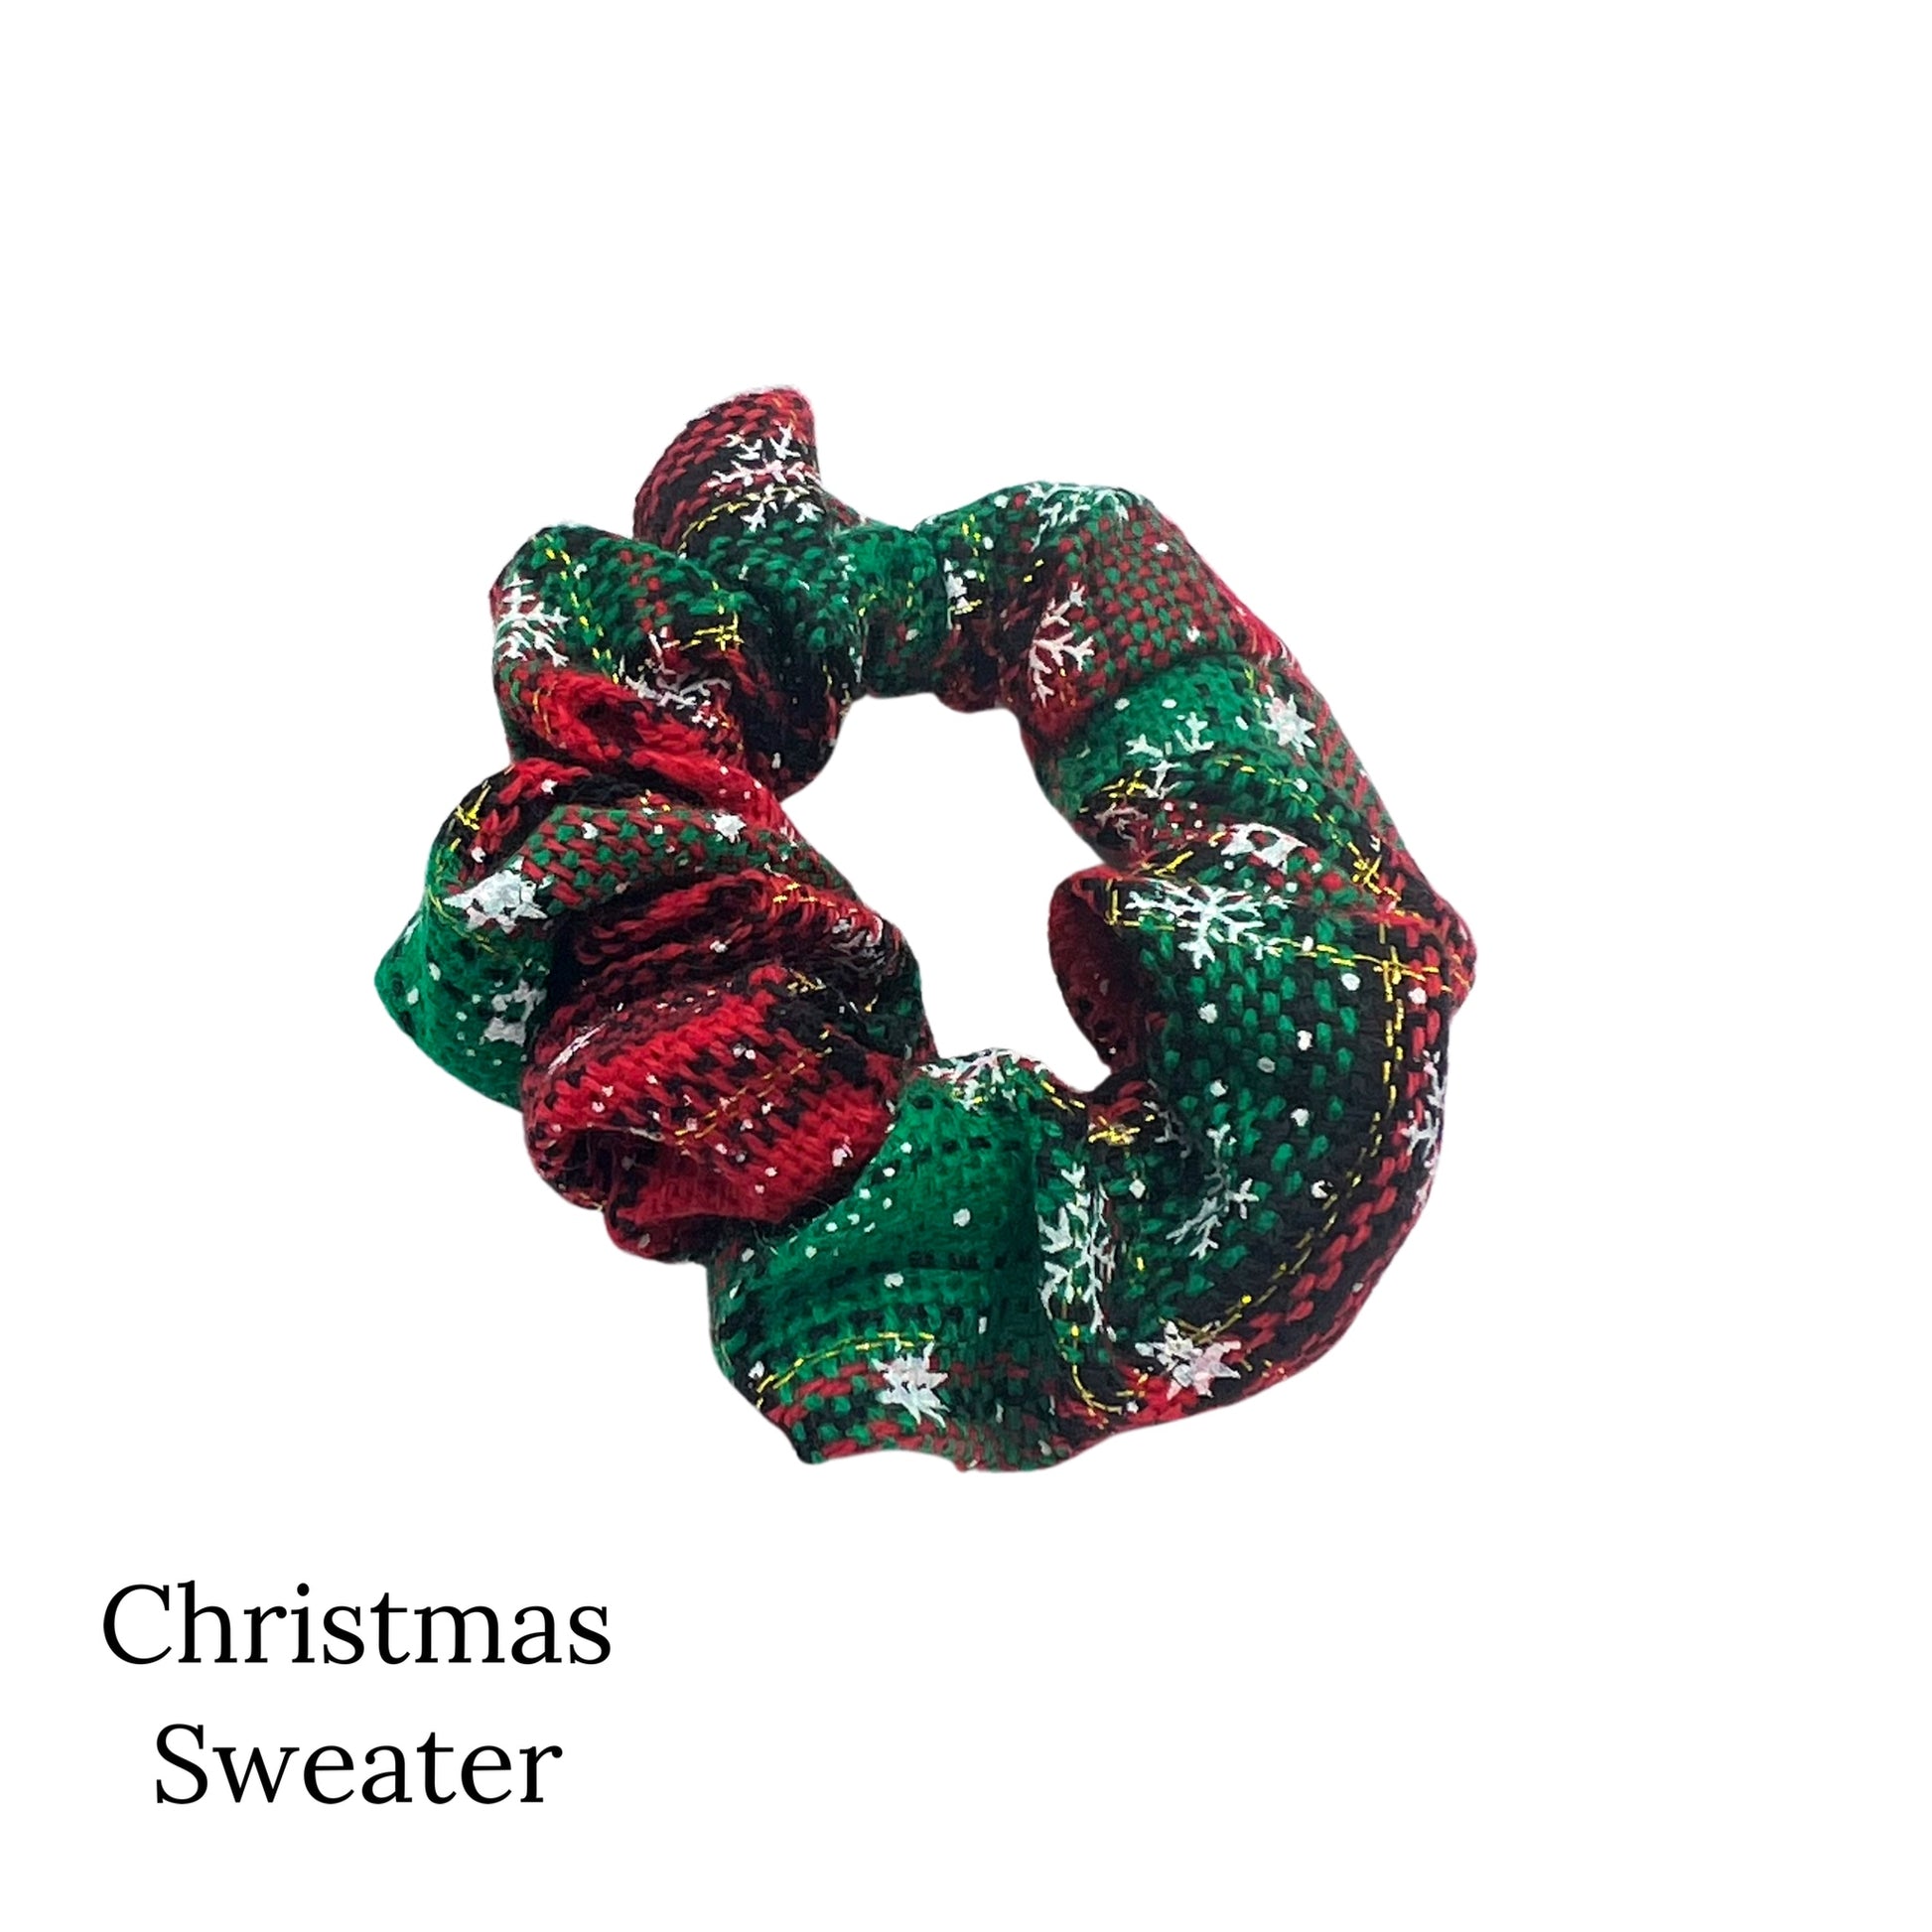 Plaid green and red scrunchie with white snowflakes